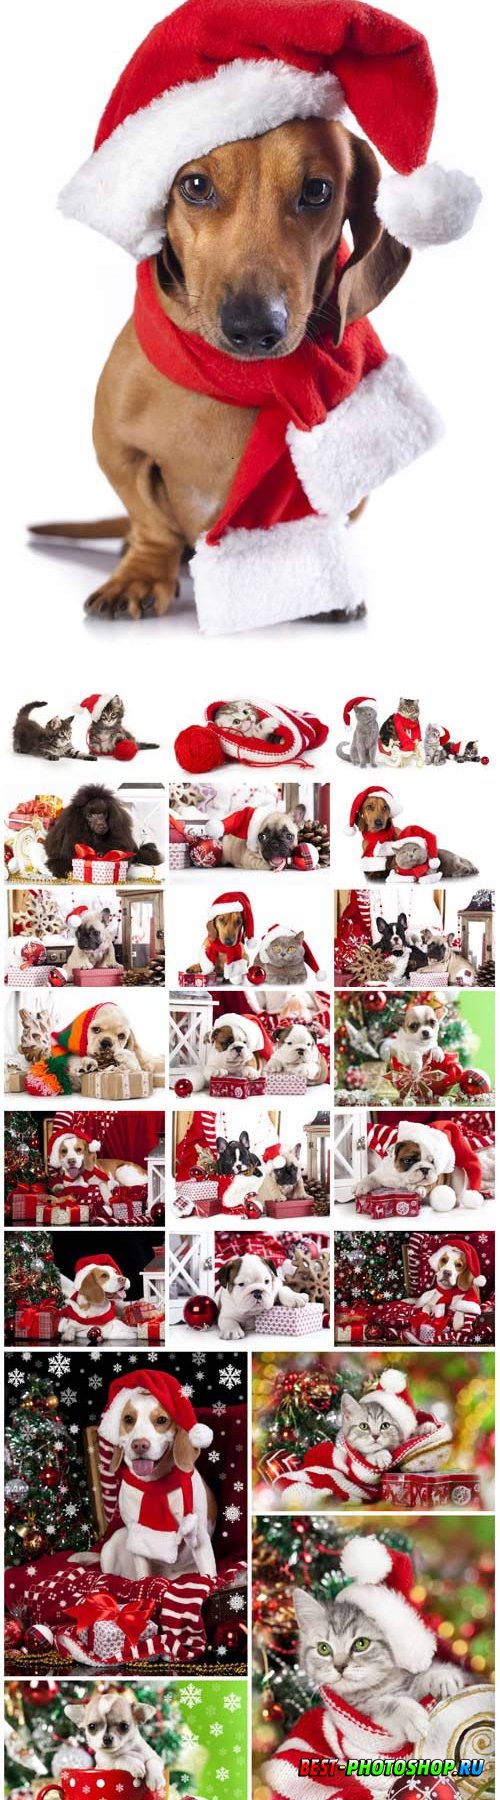 New Year and Christmas stock photos 19